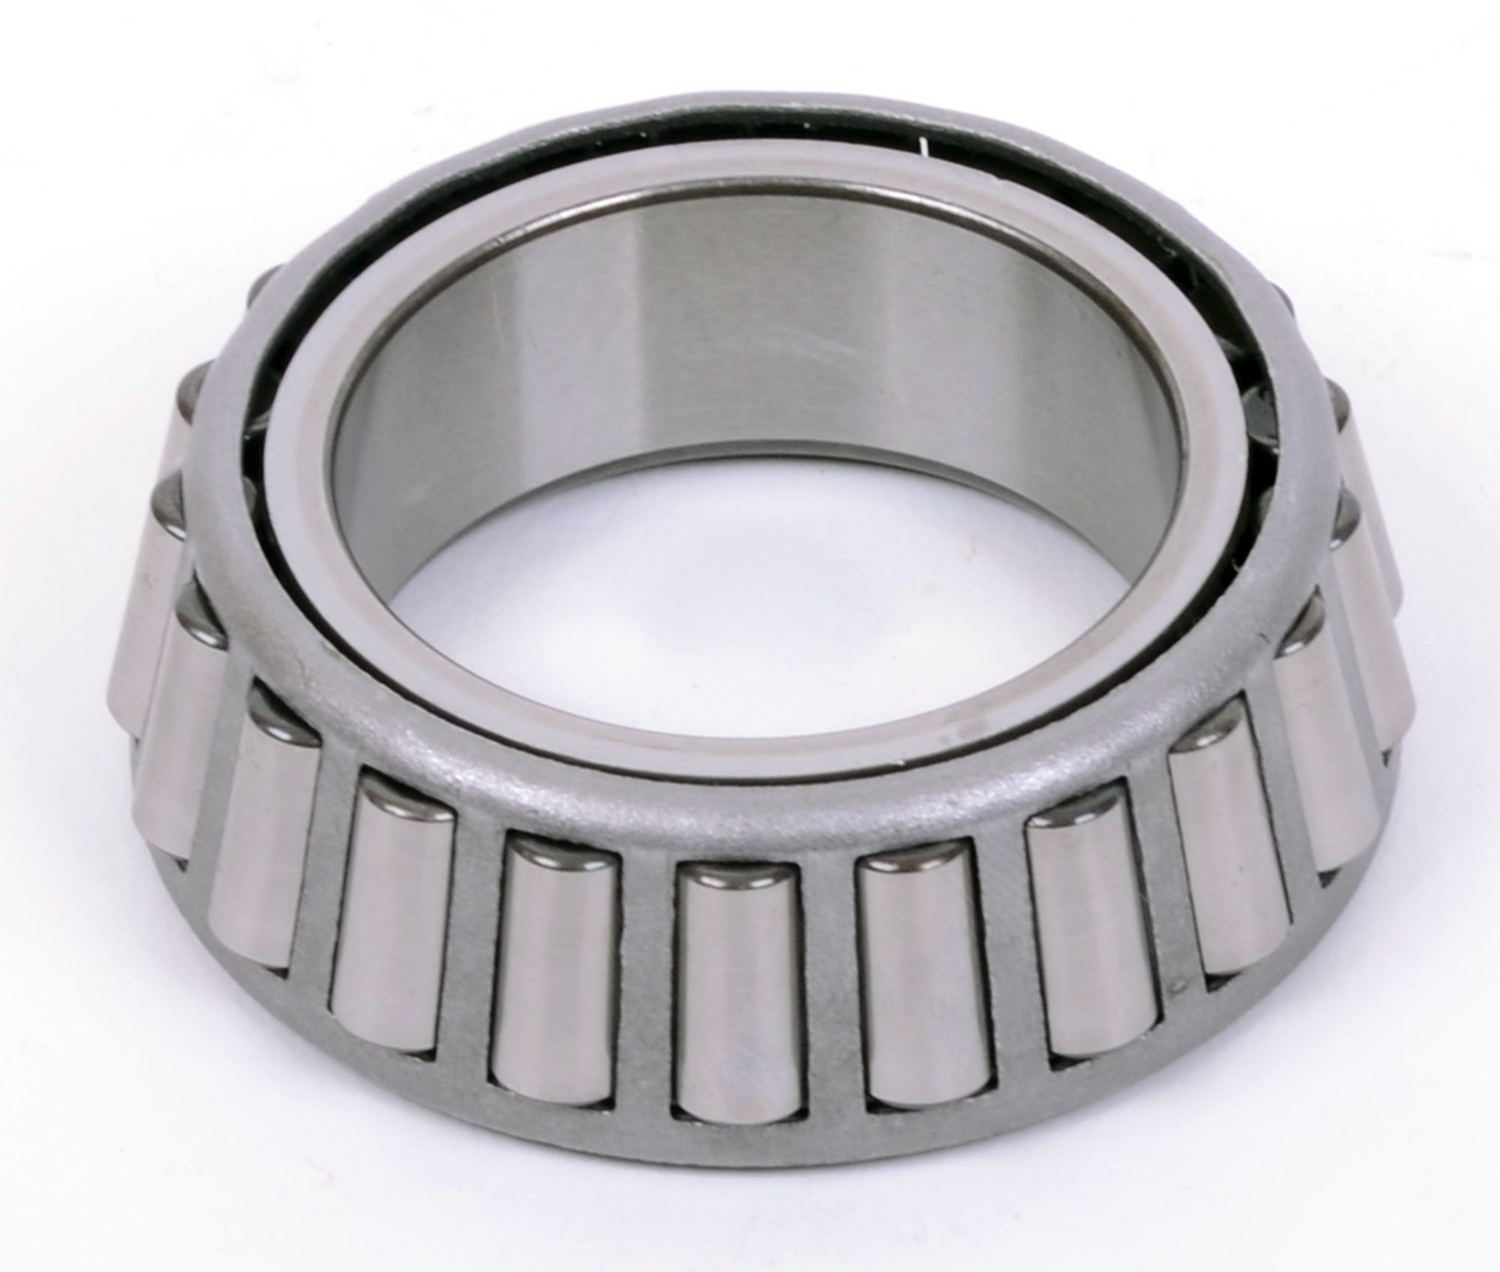 SKF (CHICAGO RAWHIDE) - Auto Trans Differential Bearing - SKF LM29749 VP